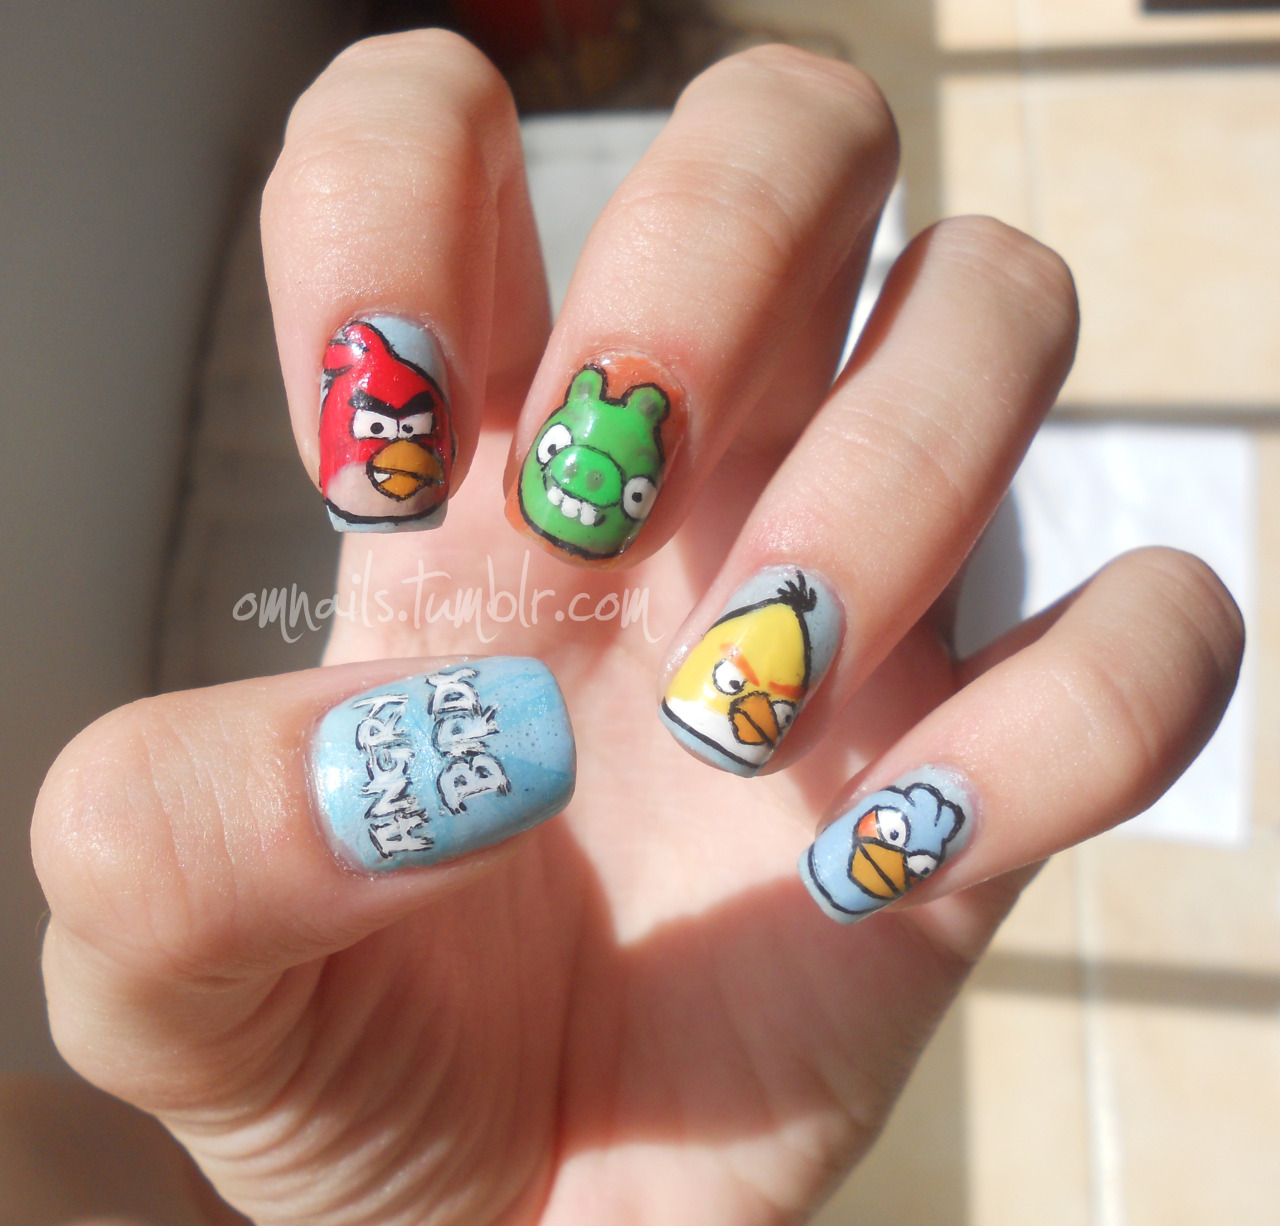 Angry birds' nail art design. 💅 | It goes on